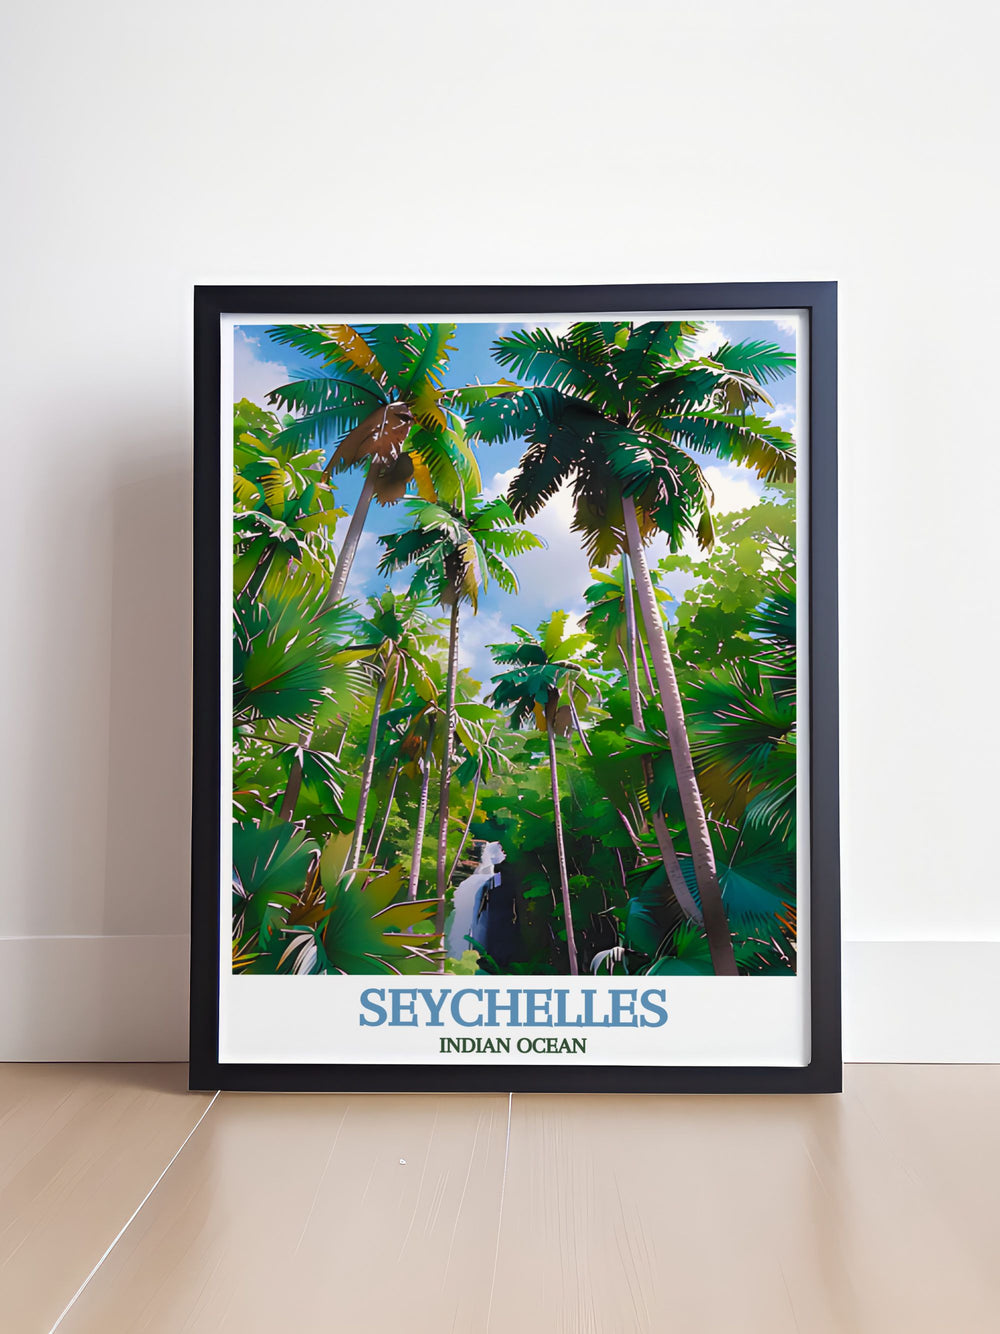 This travel poster highlights the serene beauty of Vallée de Mai in Seychelles, showcasing the dense palm forests and rare flora that make it a world renowned natural wonder.